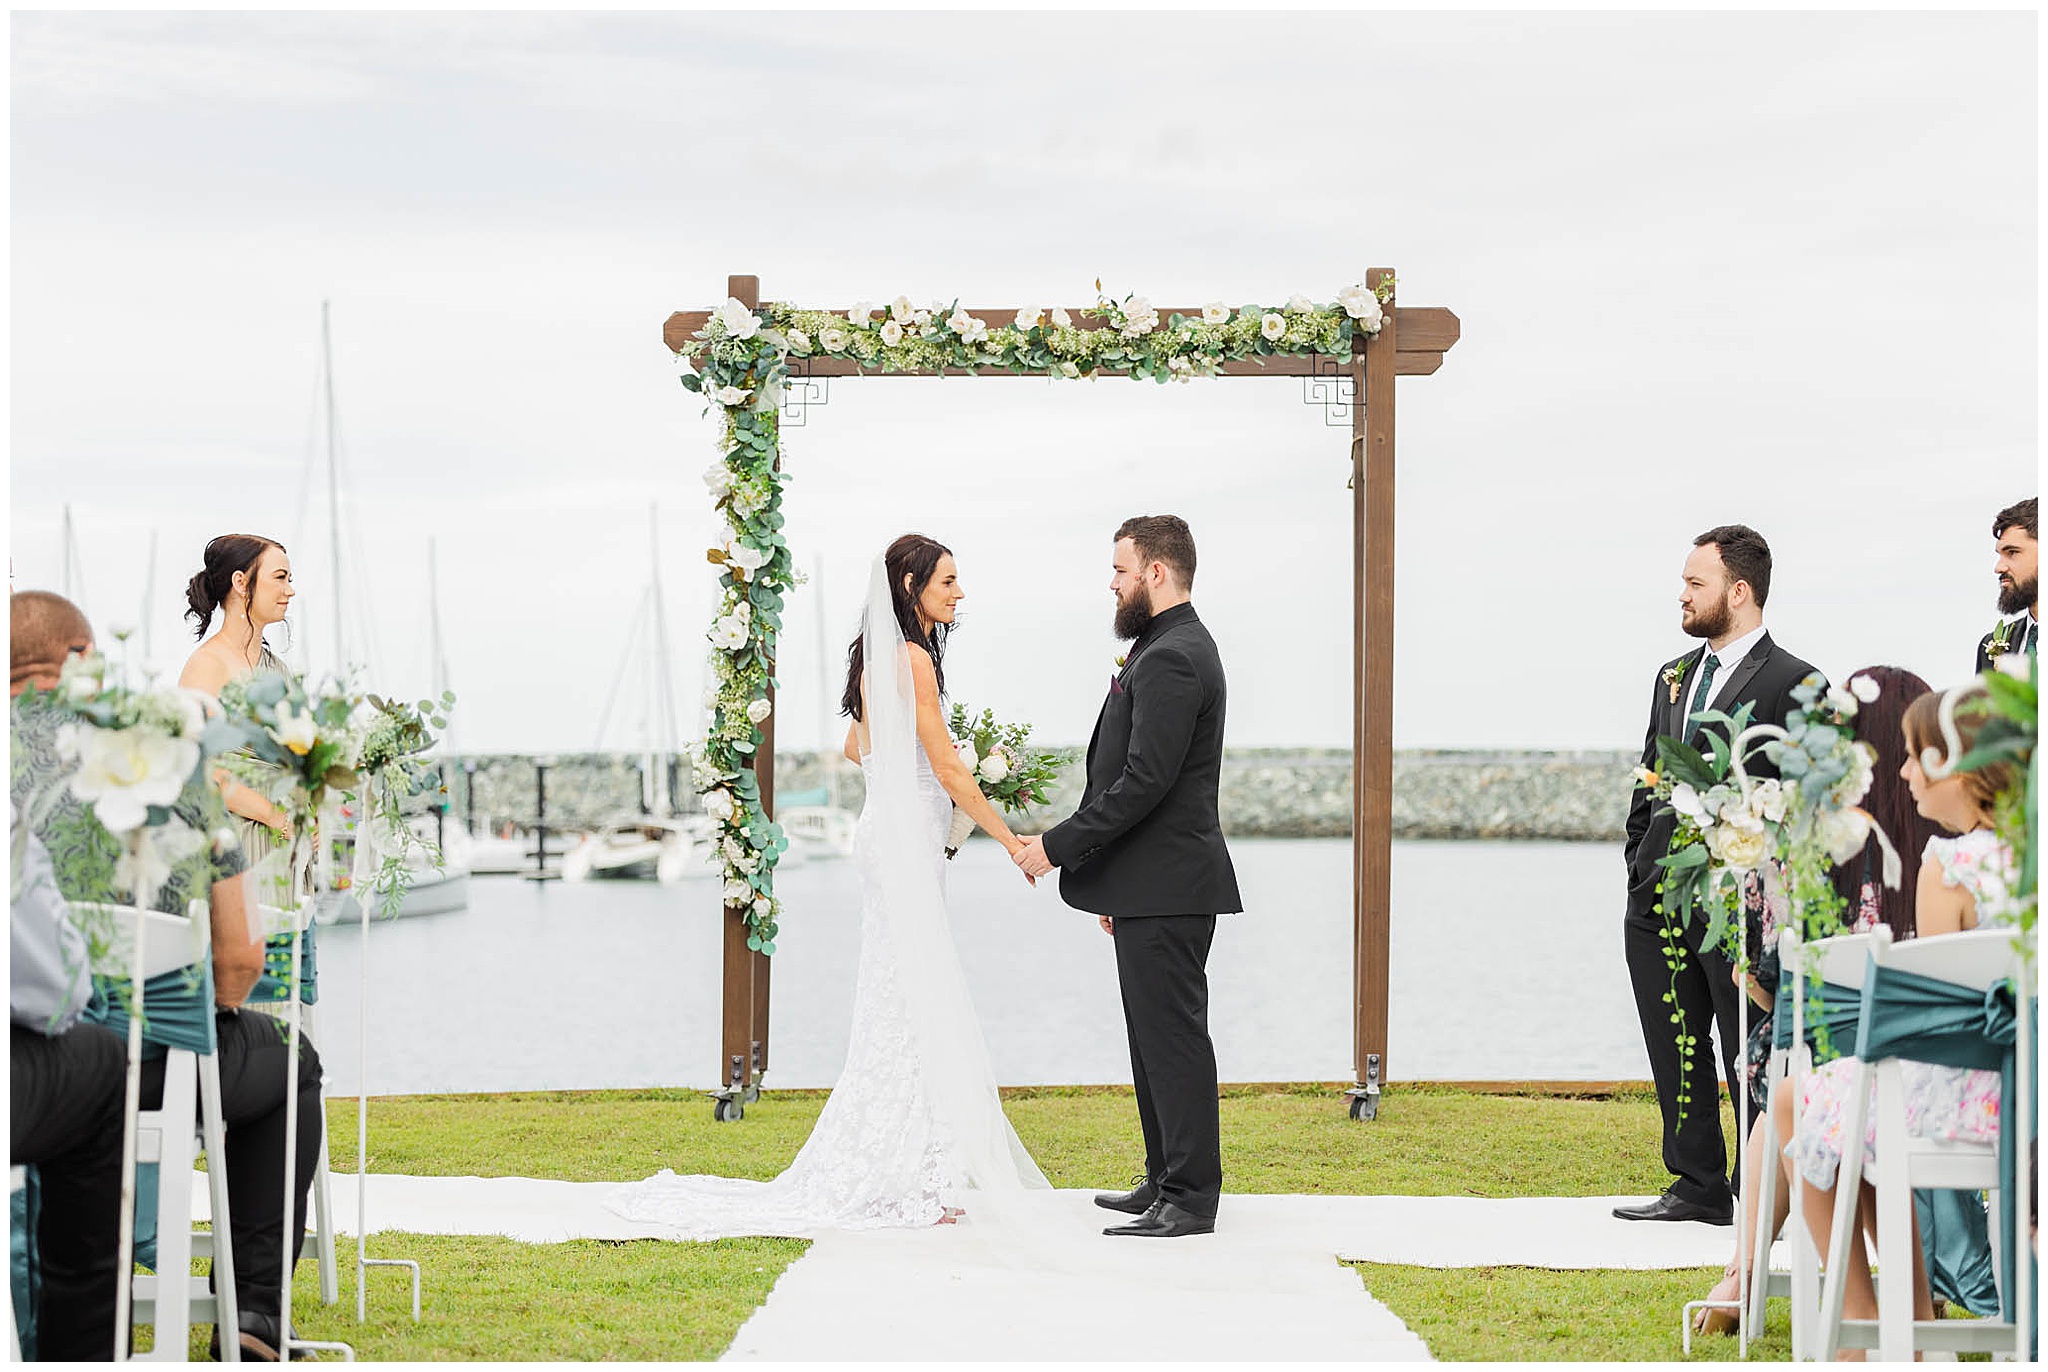 A couple getting married in front of the Mackay Harbour by photographer Alyce Holzy.